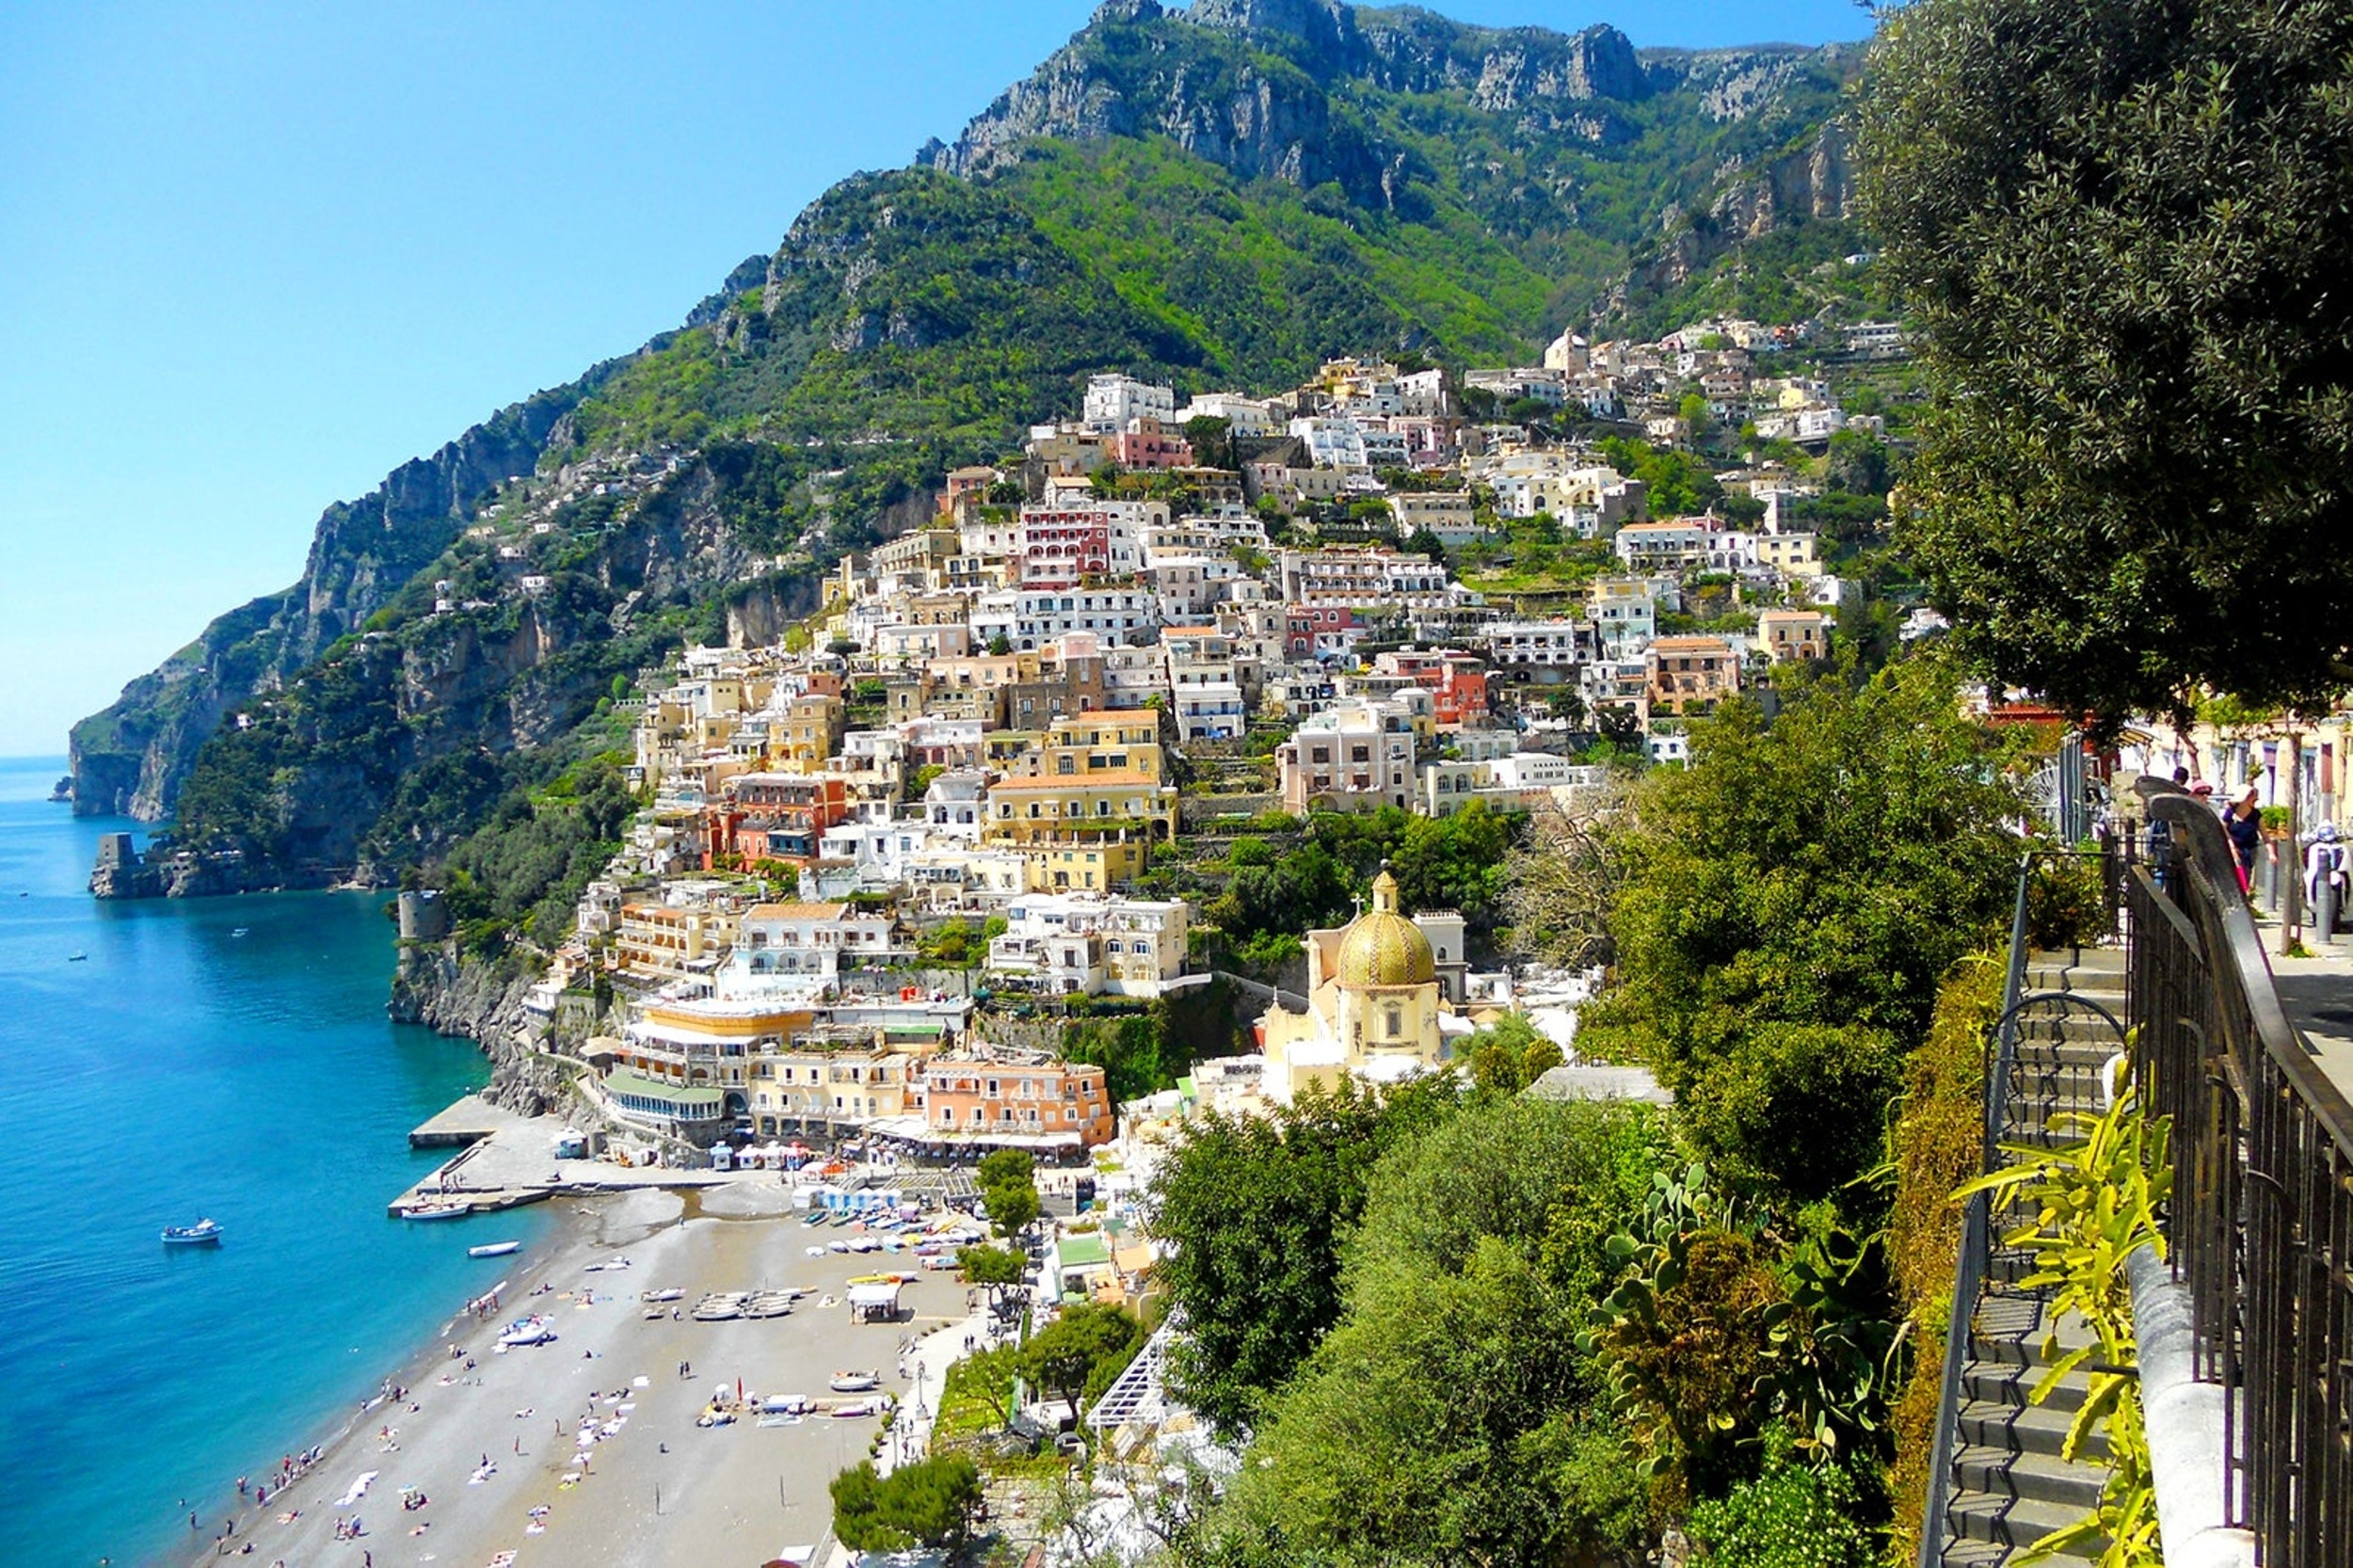 <p>There could be a list (and probably already are plenty of lists) just about all of the different things you can do in Positano. From hikes to beaches to restaurants, the possibilities are endless. We recommend you hike the Path of the Gods, then cool down at Spiaggia with a glass of champagne. </p><p><a href='https://www.msn.com/en-us/community/channel/vid-cj9pqbr0vn9in2b6ddcd8sfgpfq6x6utp44fssrv6mc2gtybw0us'>Follow us on MSN to see more of our exclusive lifestyle content.</a></p>